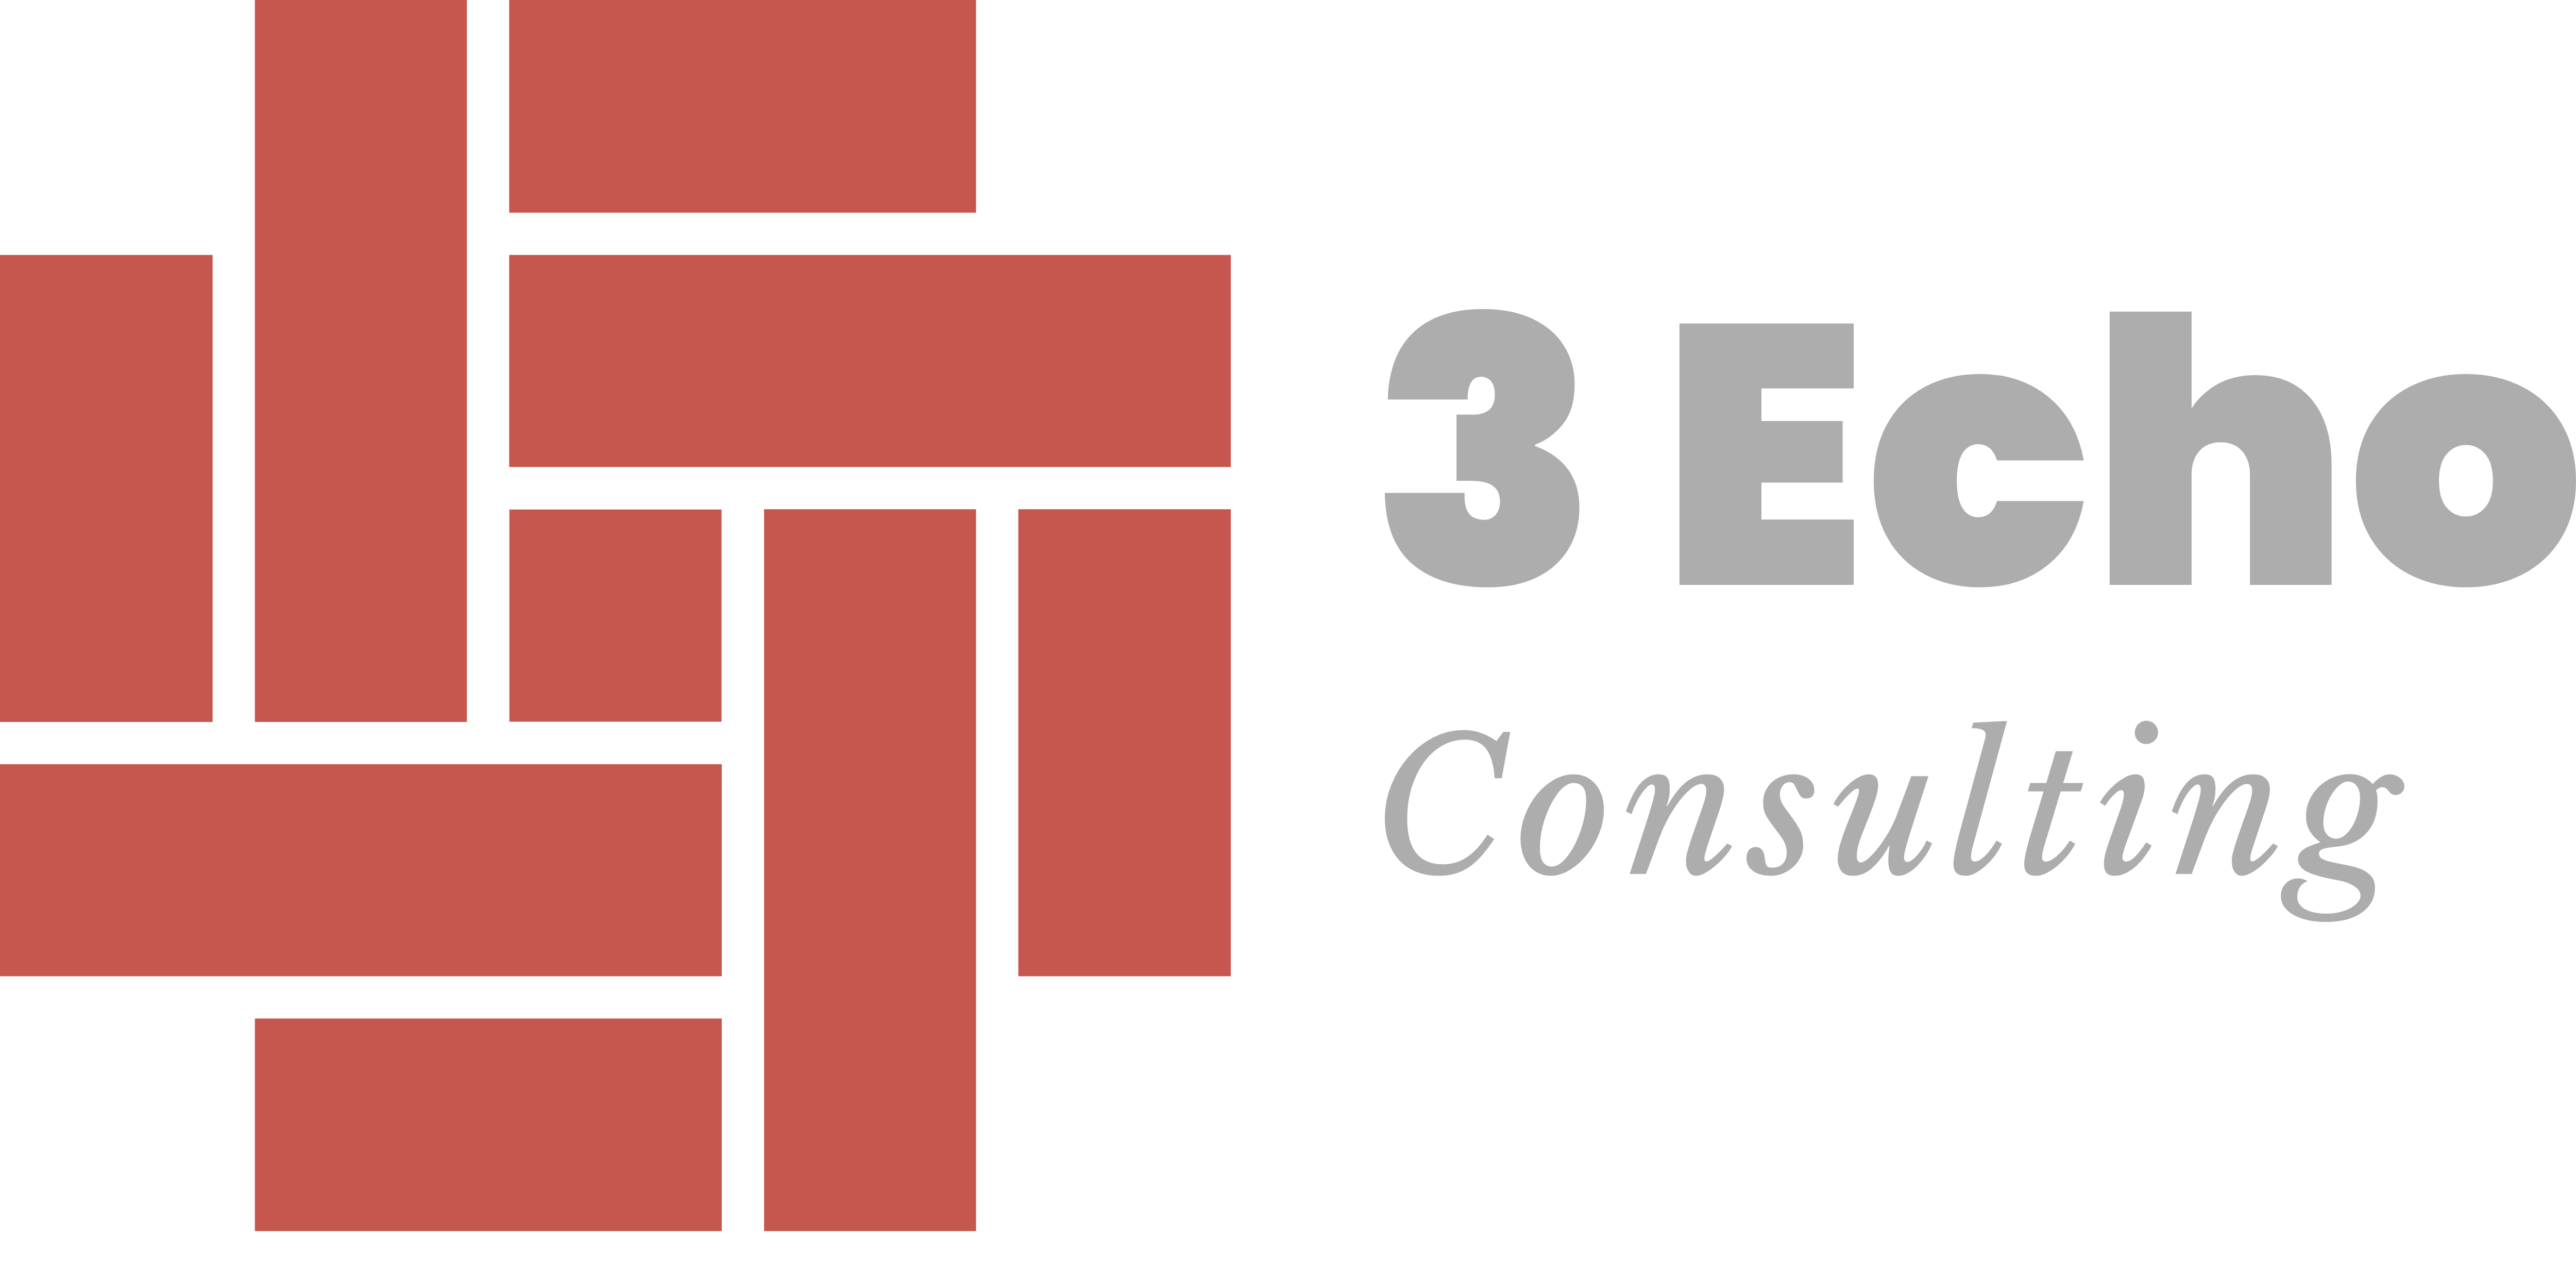 3 Echo Consulting